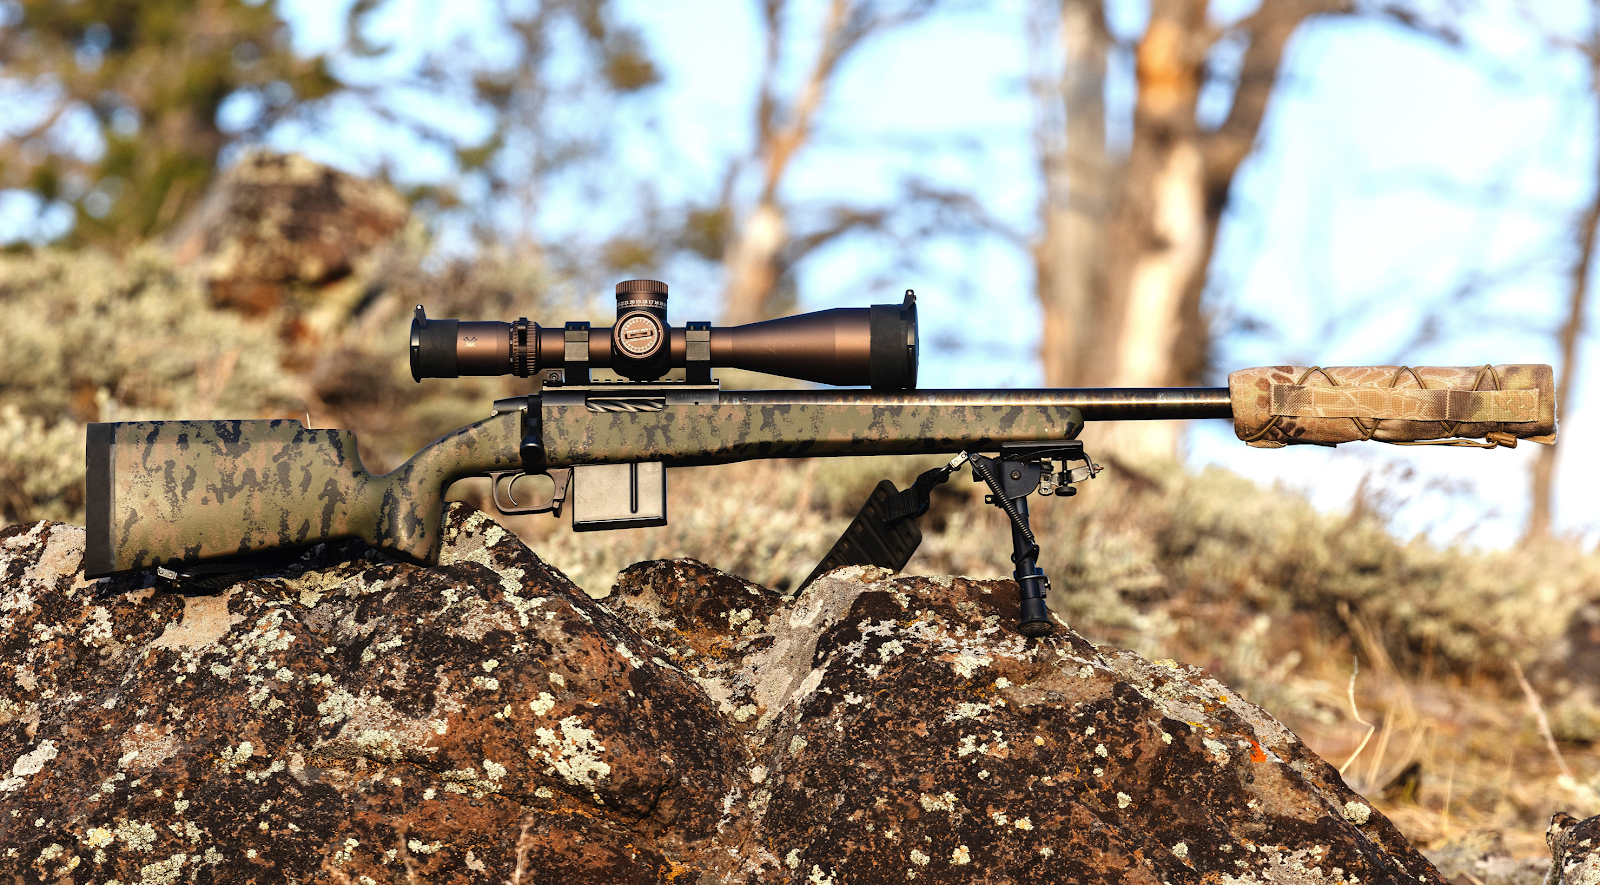 A rifle with a scope on a rock

Description automatically generated